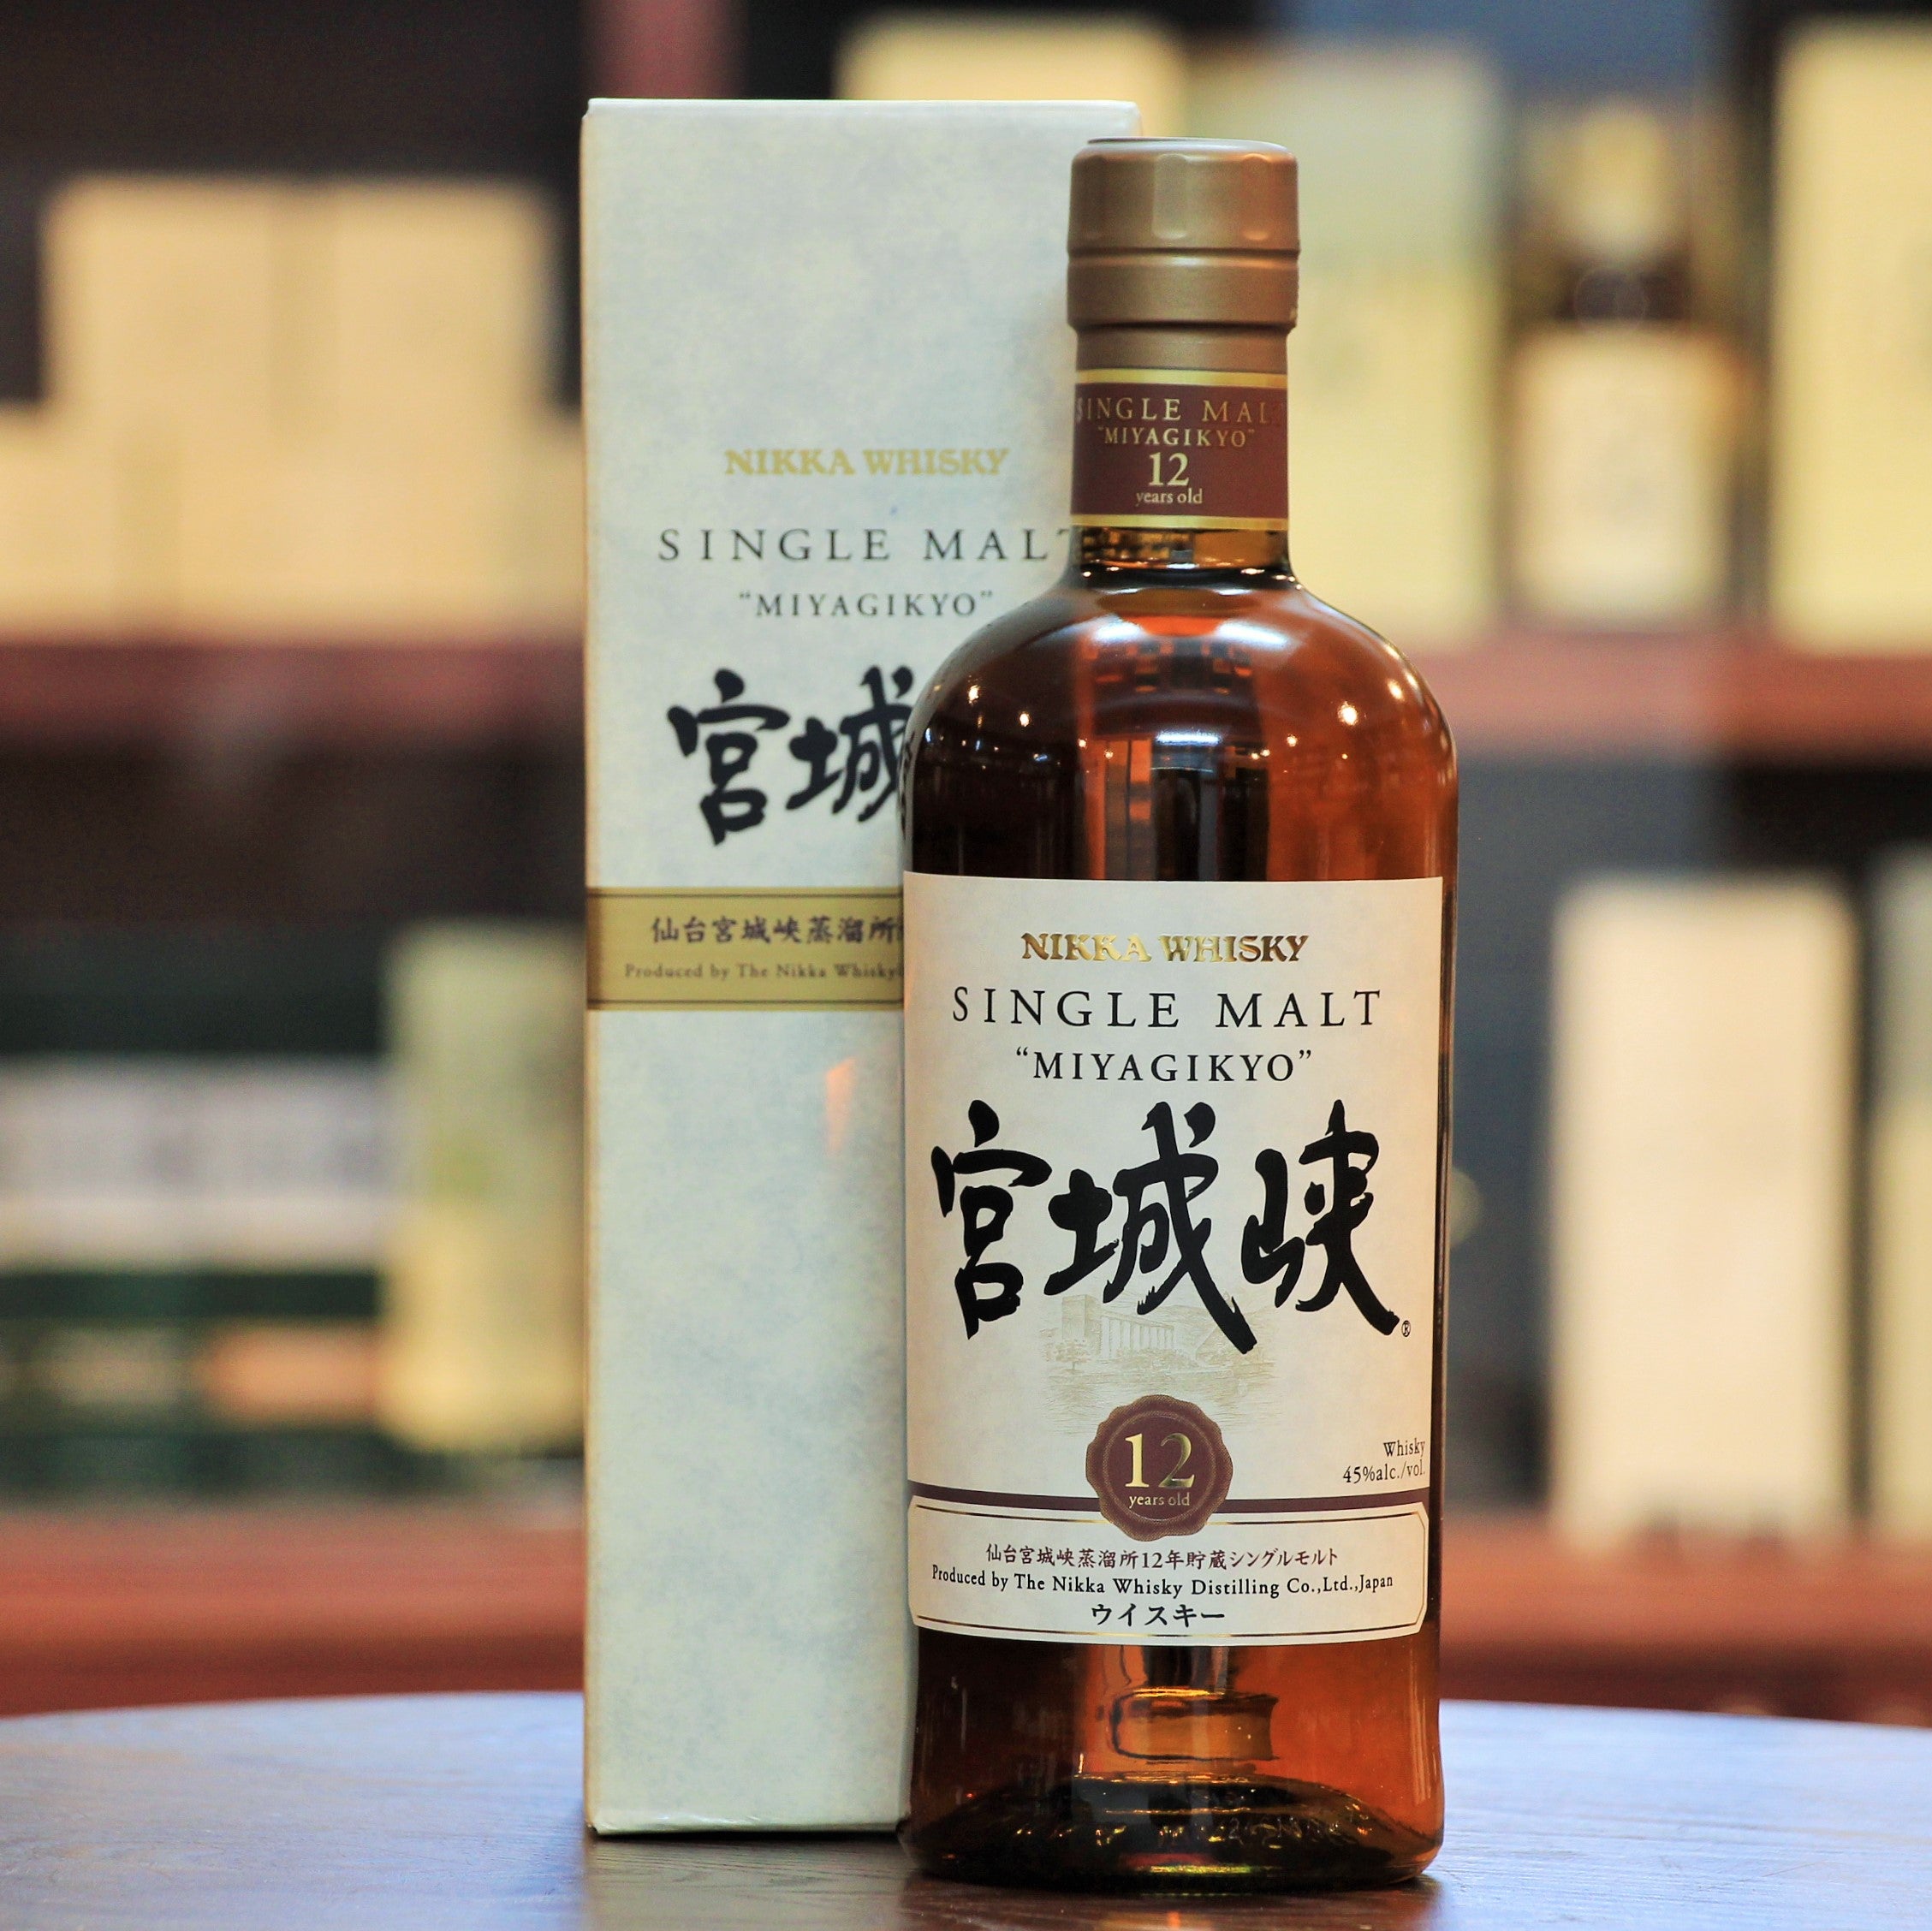 Miyagikyo 12 Years Single Malt Whisky, A rich and very balanced for the age, with toasted coffee beans, spices, floral notes this is an excellent whisky. The sherry cask influence comes through beautifully. Again sadly discontinued.